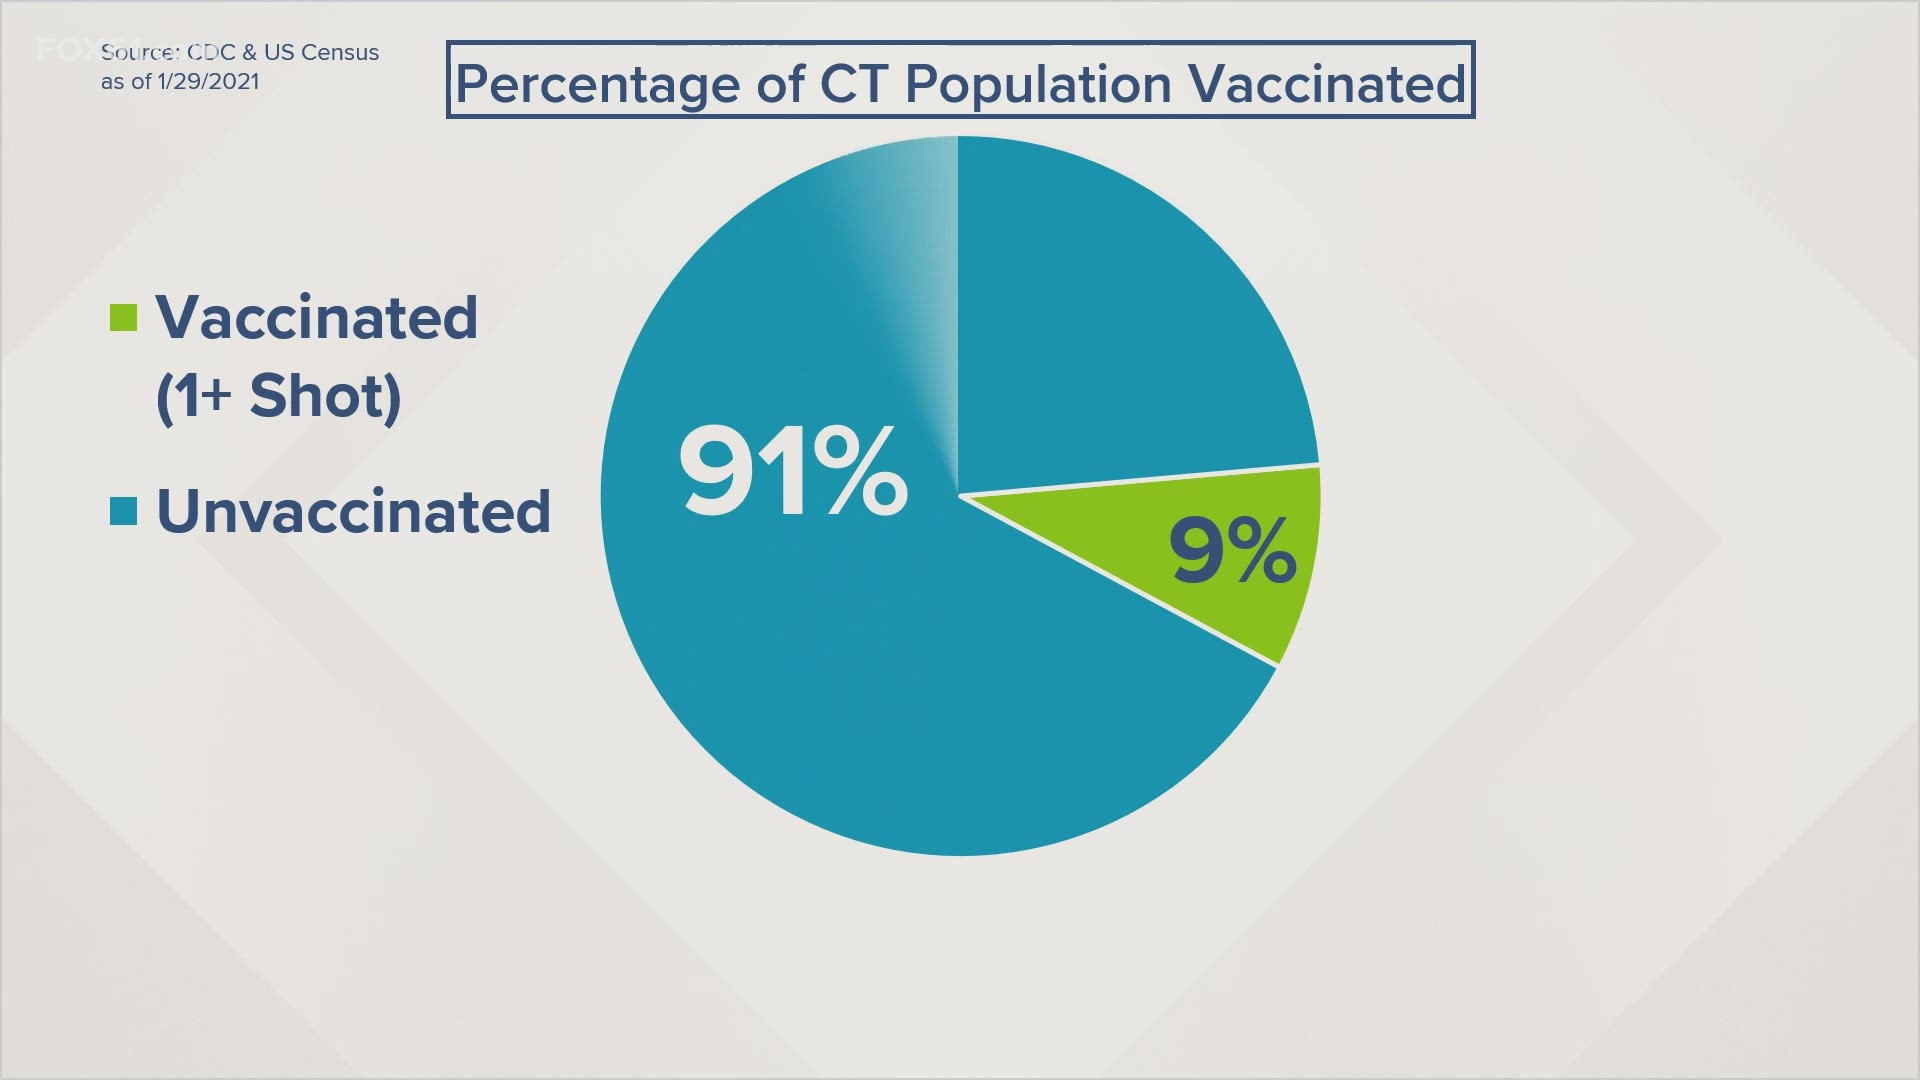 White House Senior Advisor Andy Slavitt praised Connecticut along with several other states on providing vaccinations to more than 10% of their adult populations.